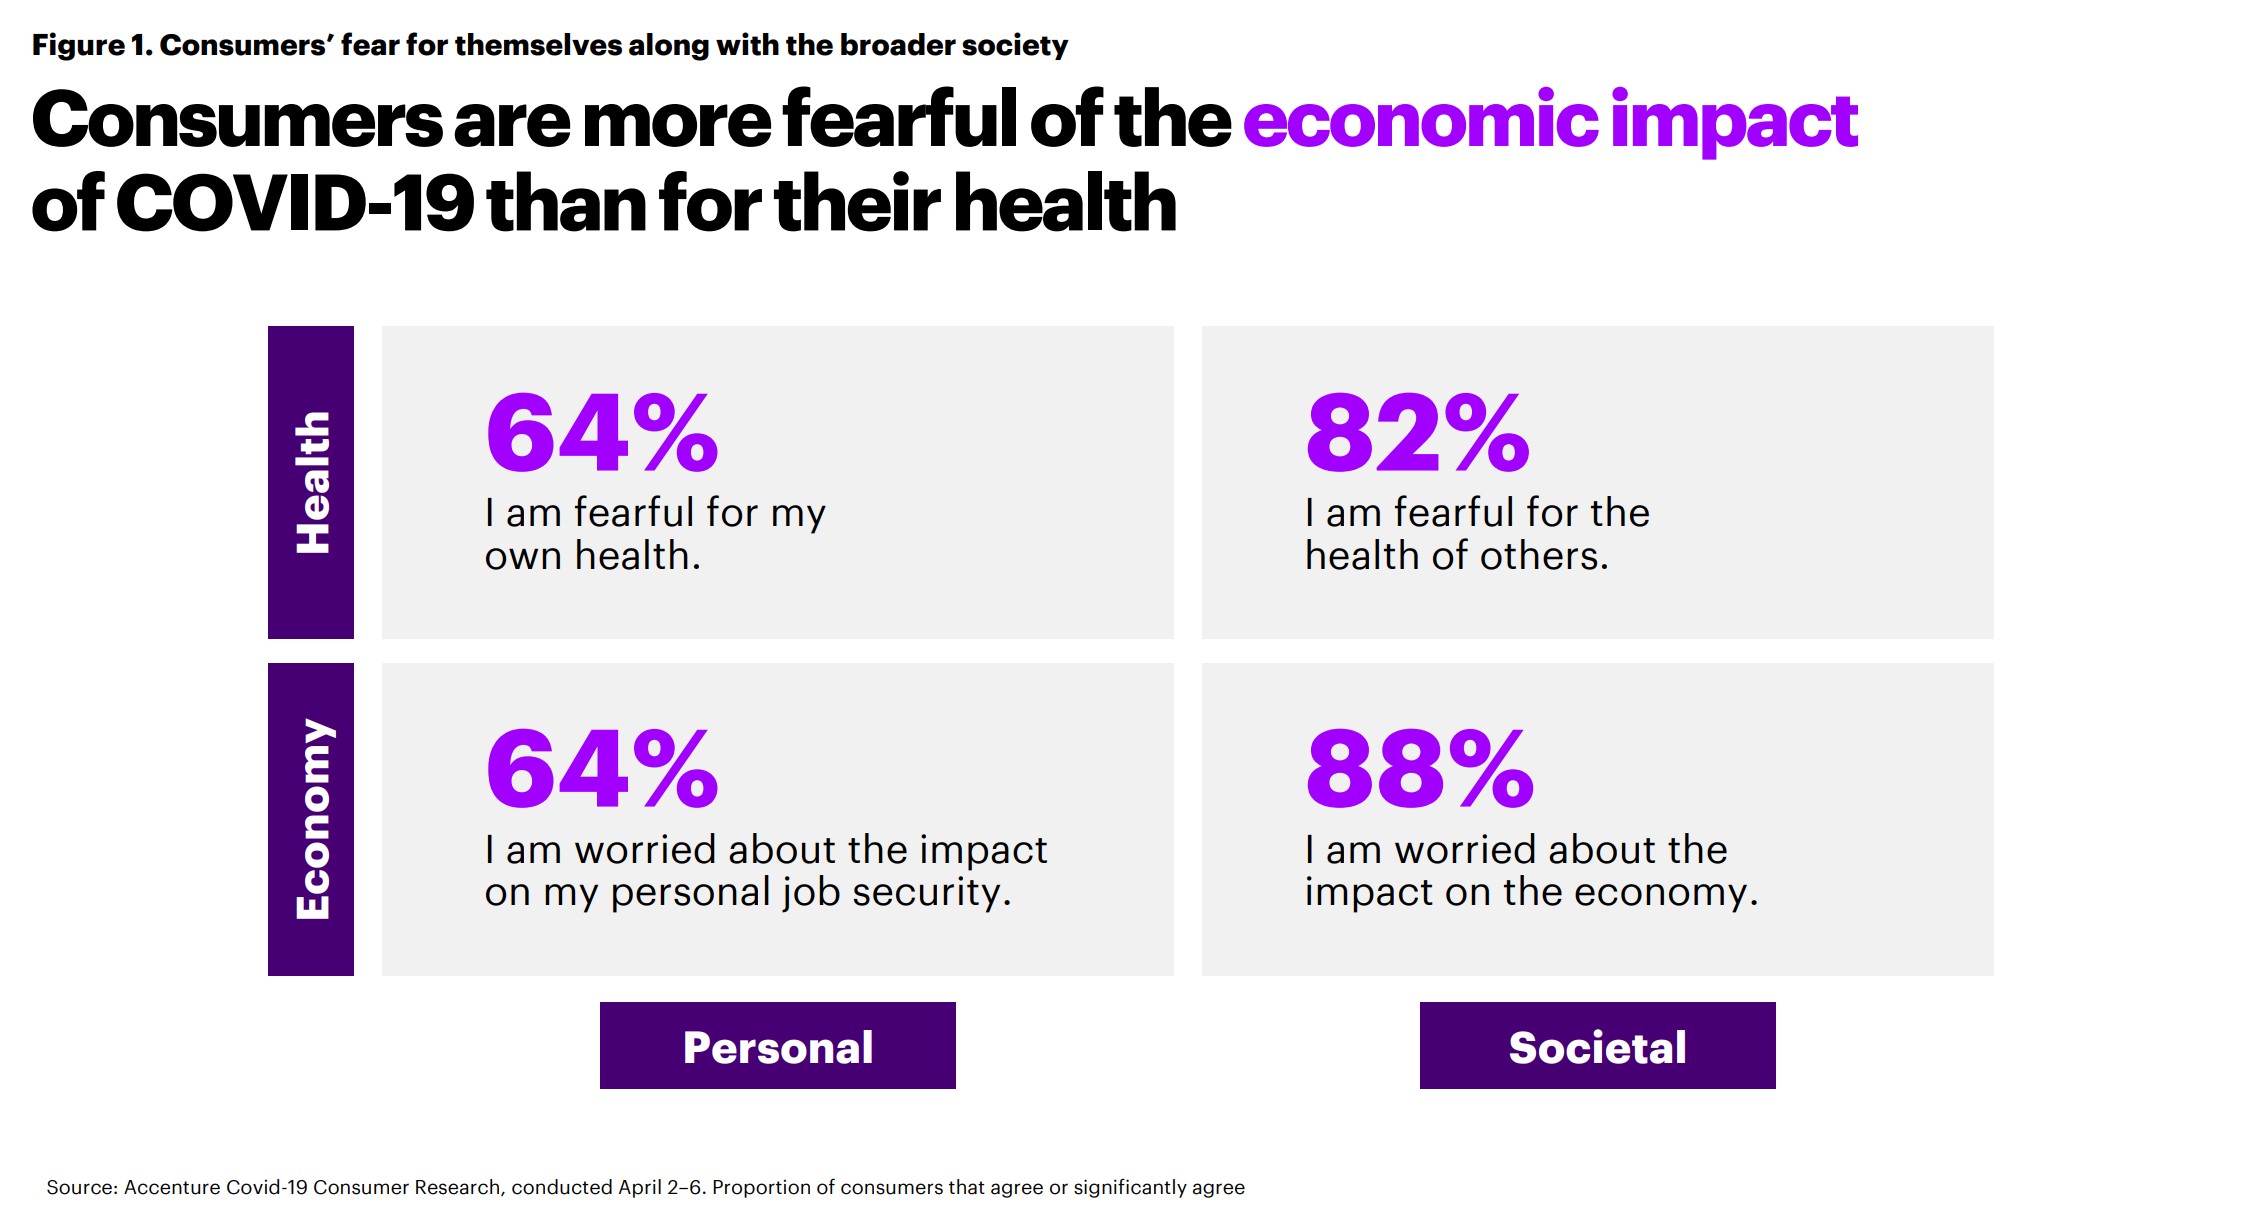 Consumers are more fearful of the economic impact of COVID-19 than for their health 